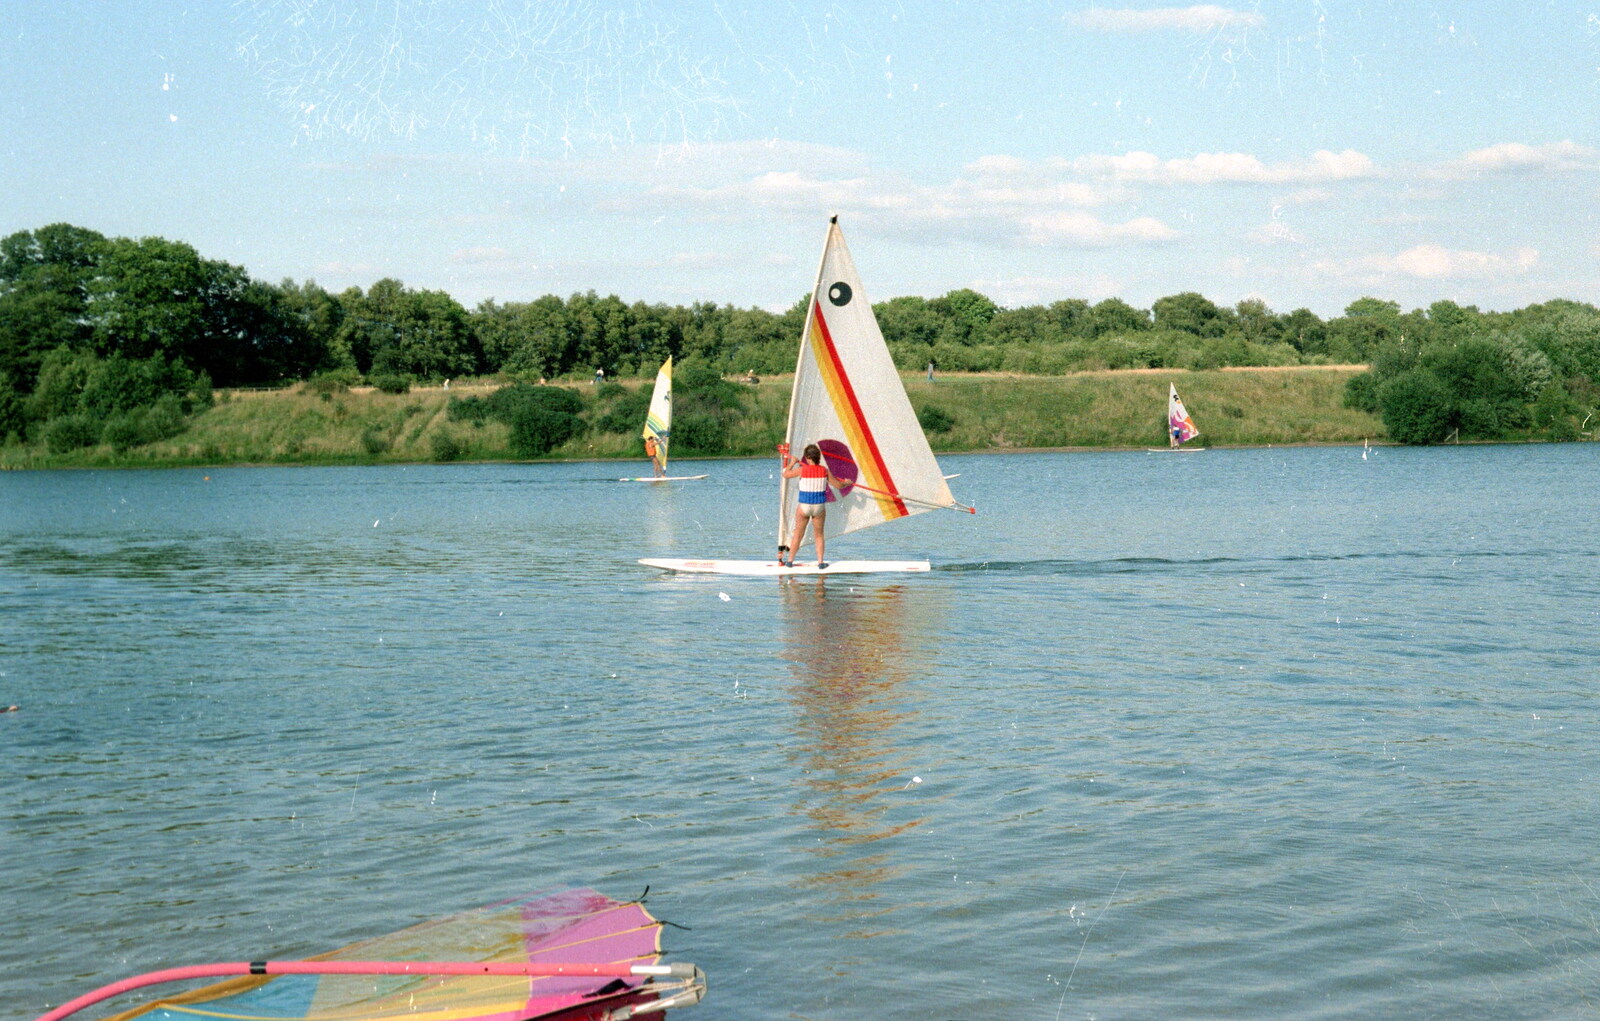 Someone else, who knows what they're doing from Nosher Goes Windsurfing, Macclesfield, Cheshire - 20th June 1985